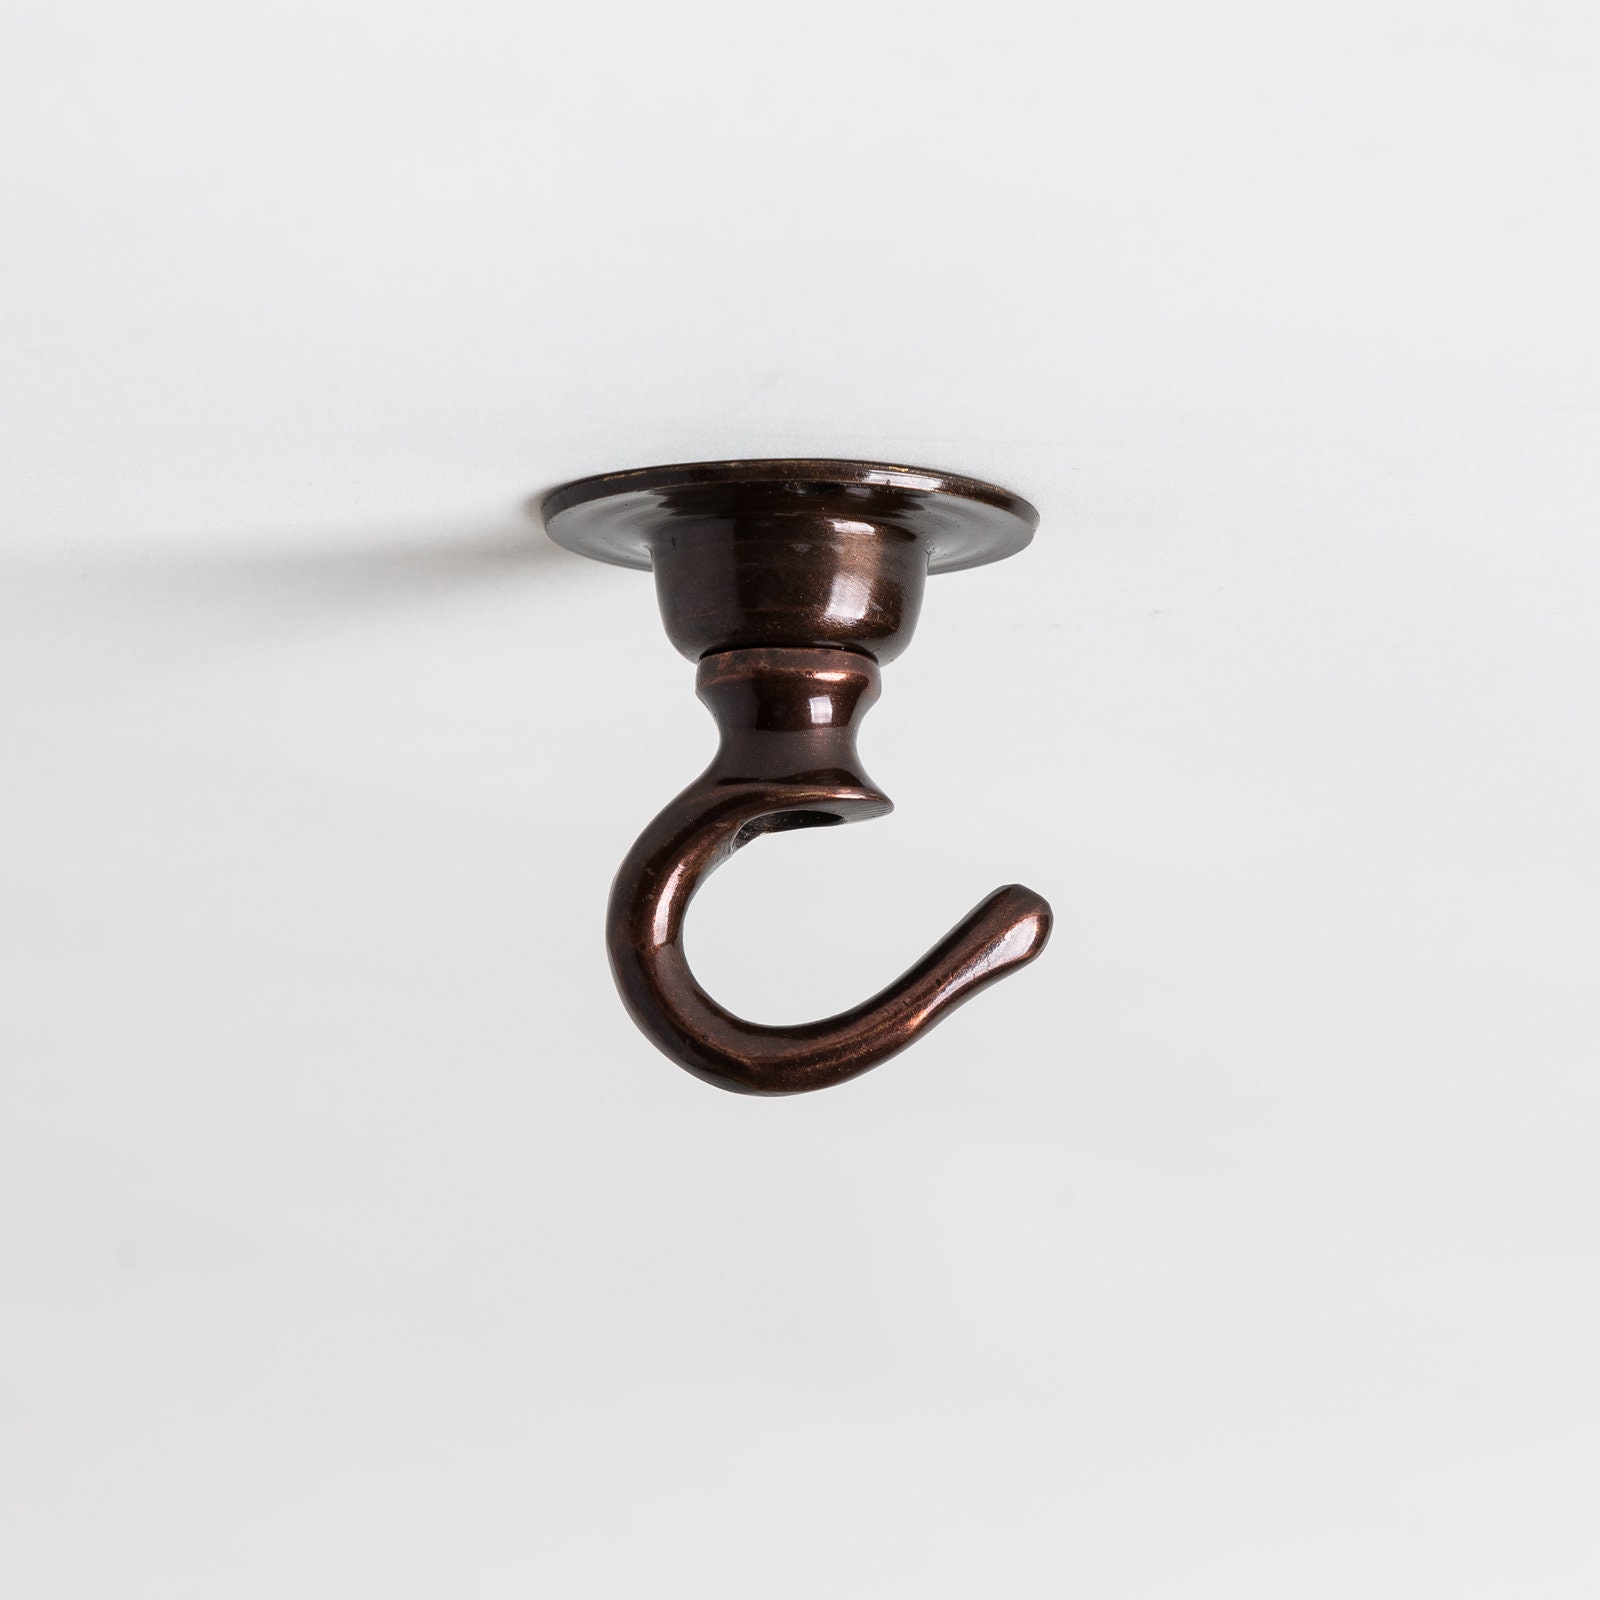 Ceiling Hook for Light Fittings Copper Various FINISHES